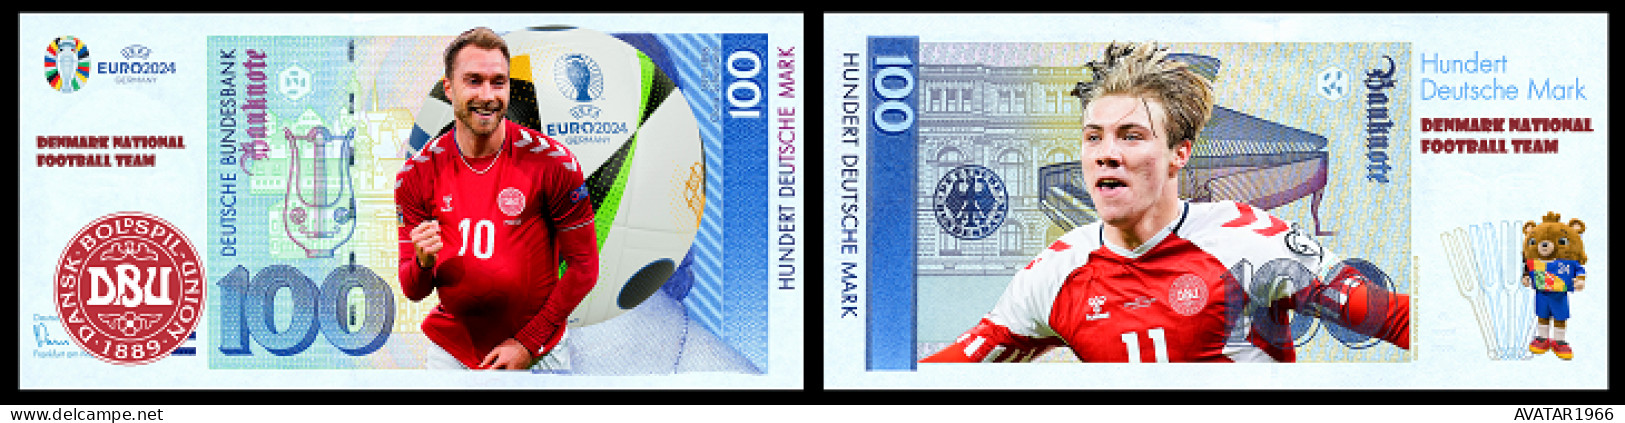 UEFA European Football Championship 2024 qualified country  Denmark 8 pieces Germany fantasy paper money